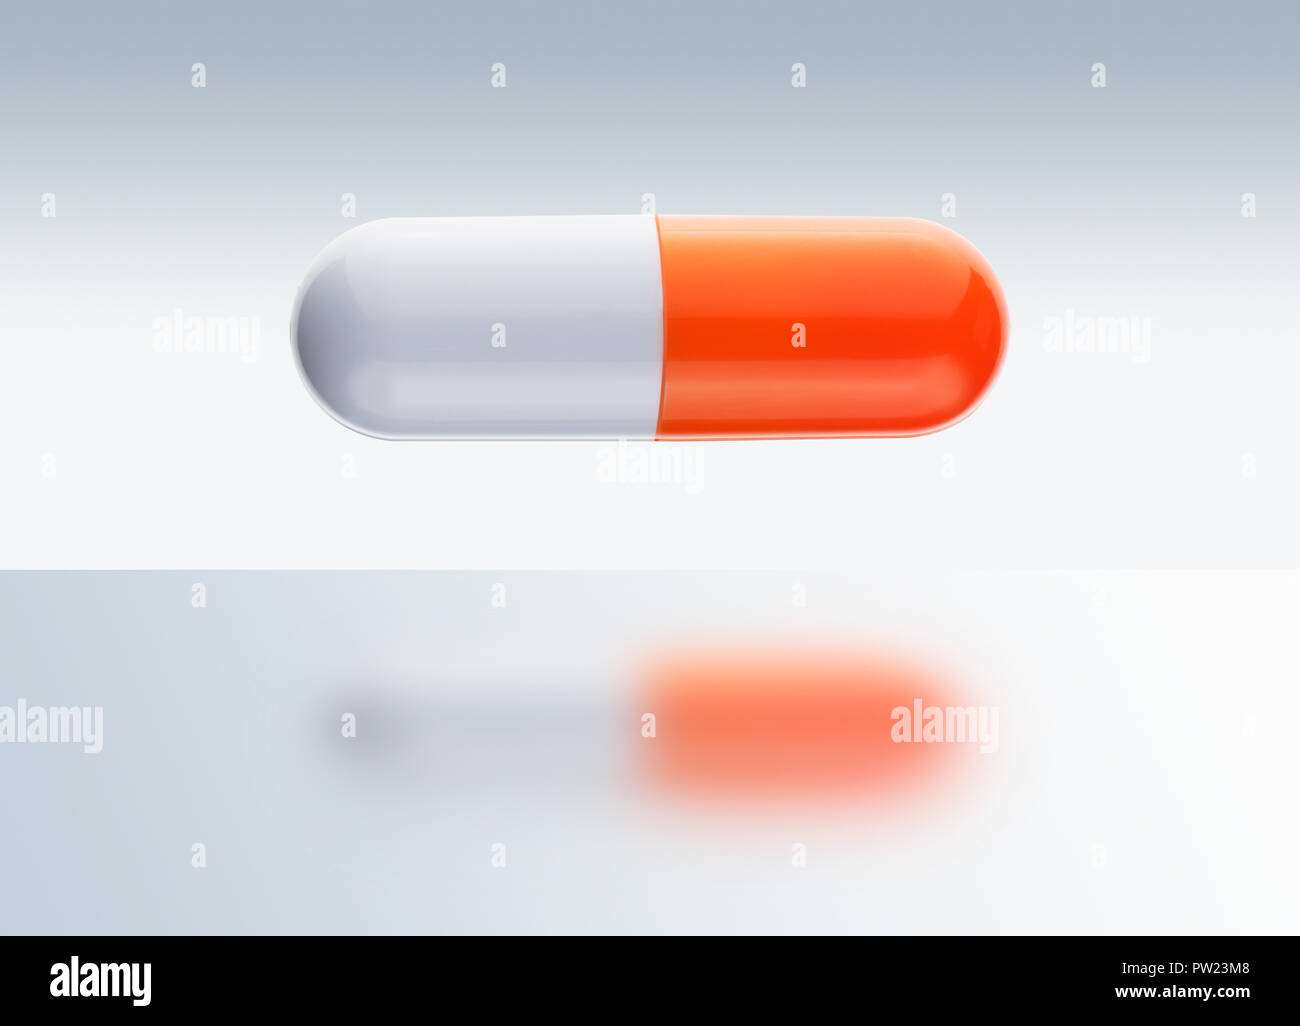 A Orange and White Pill Suspended in Mid Air Stock Photo